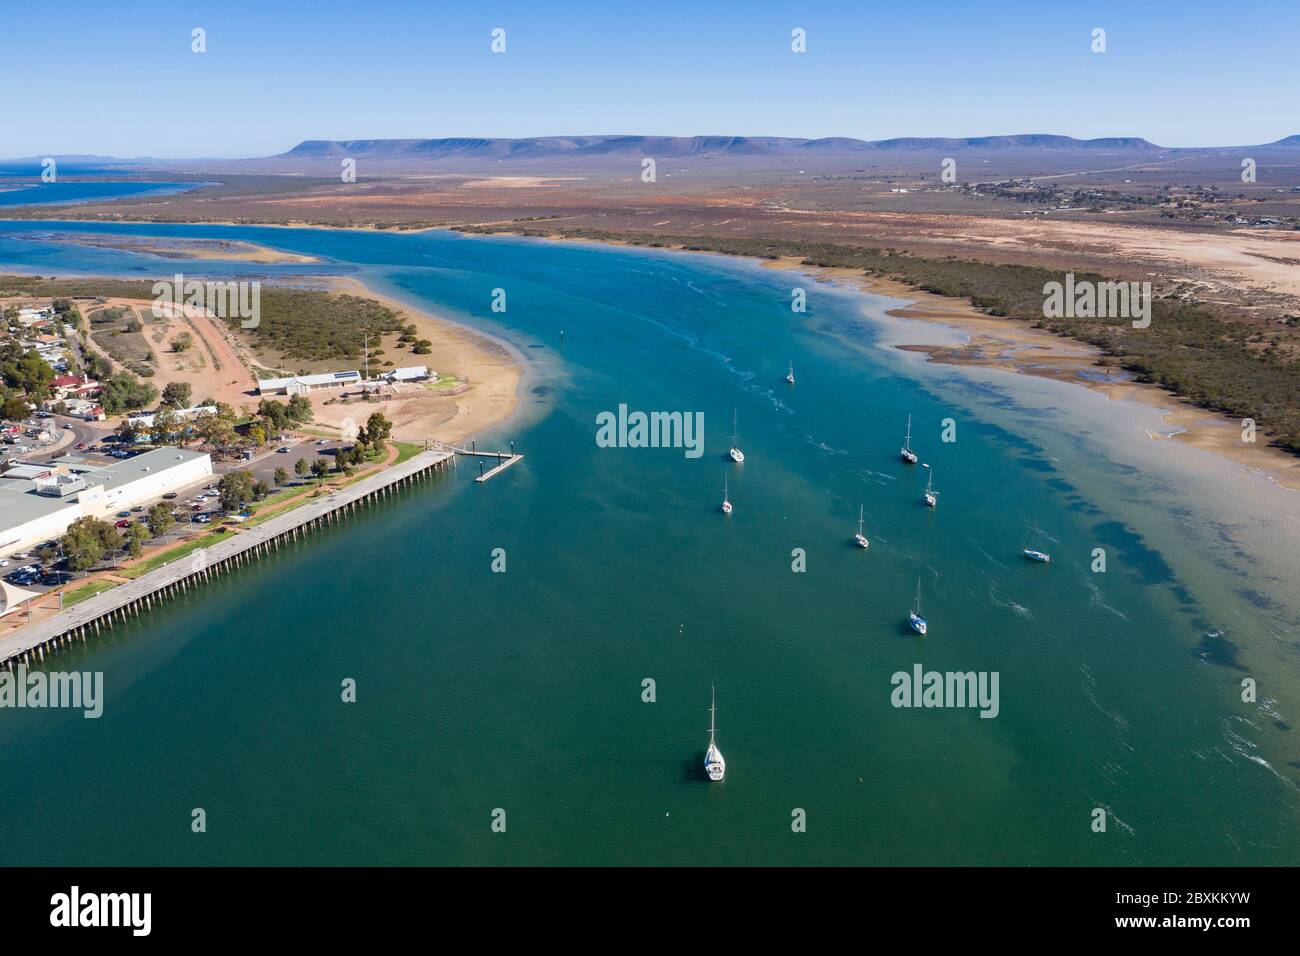 Port Augusta South Australia September 13th 2019 : Aerial view of boats in the harbor at Port Augusta in South Australia Stock Photo